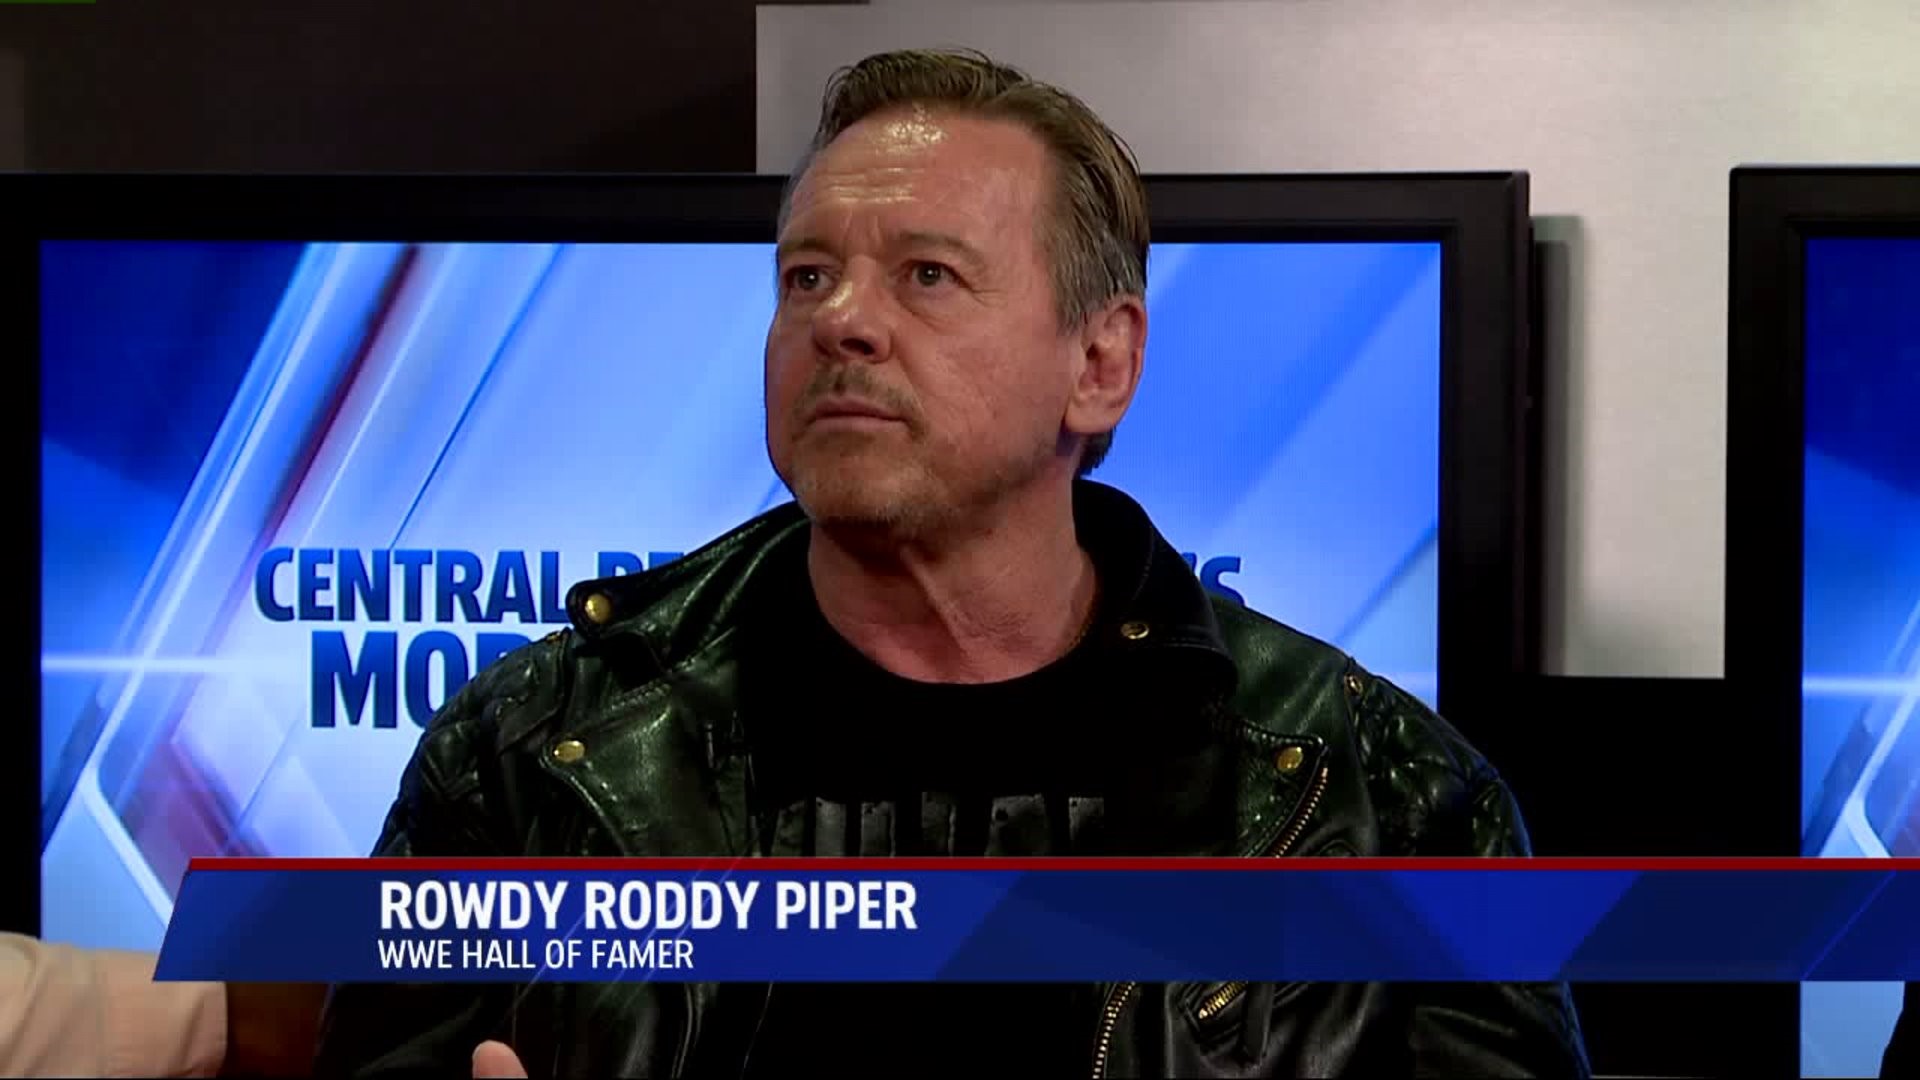 Rowdy Roddy Piper talks about anti-bullying campaign